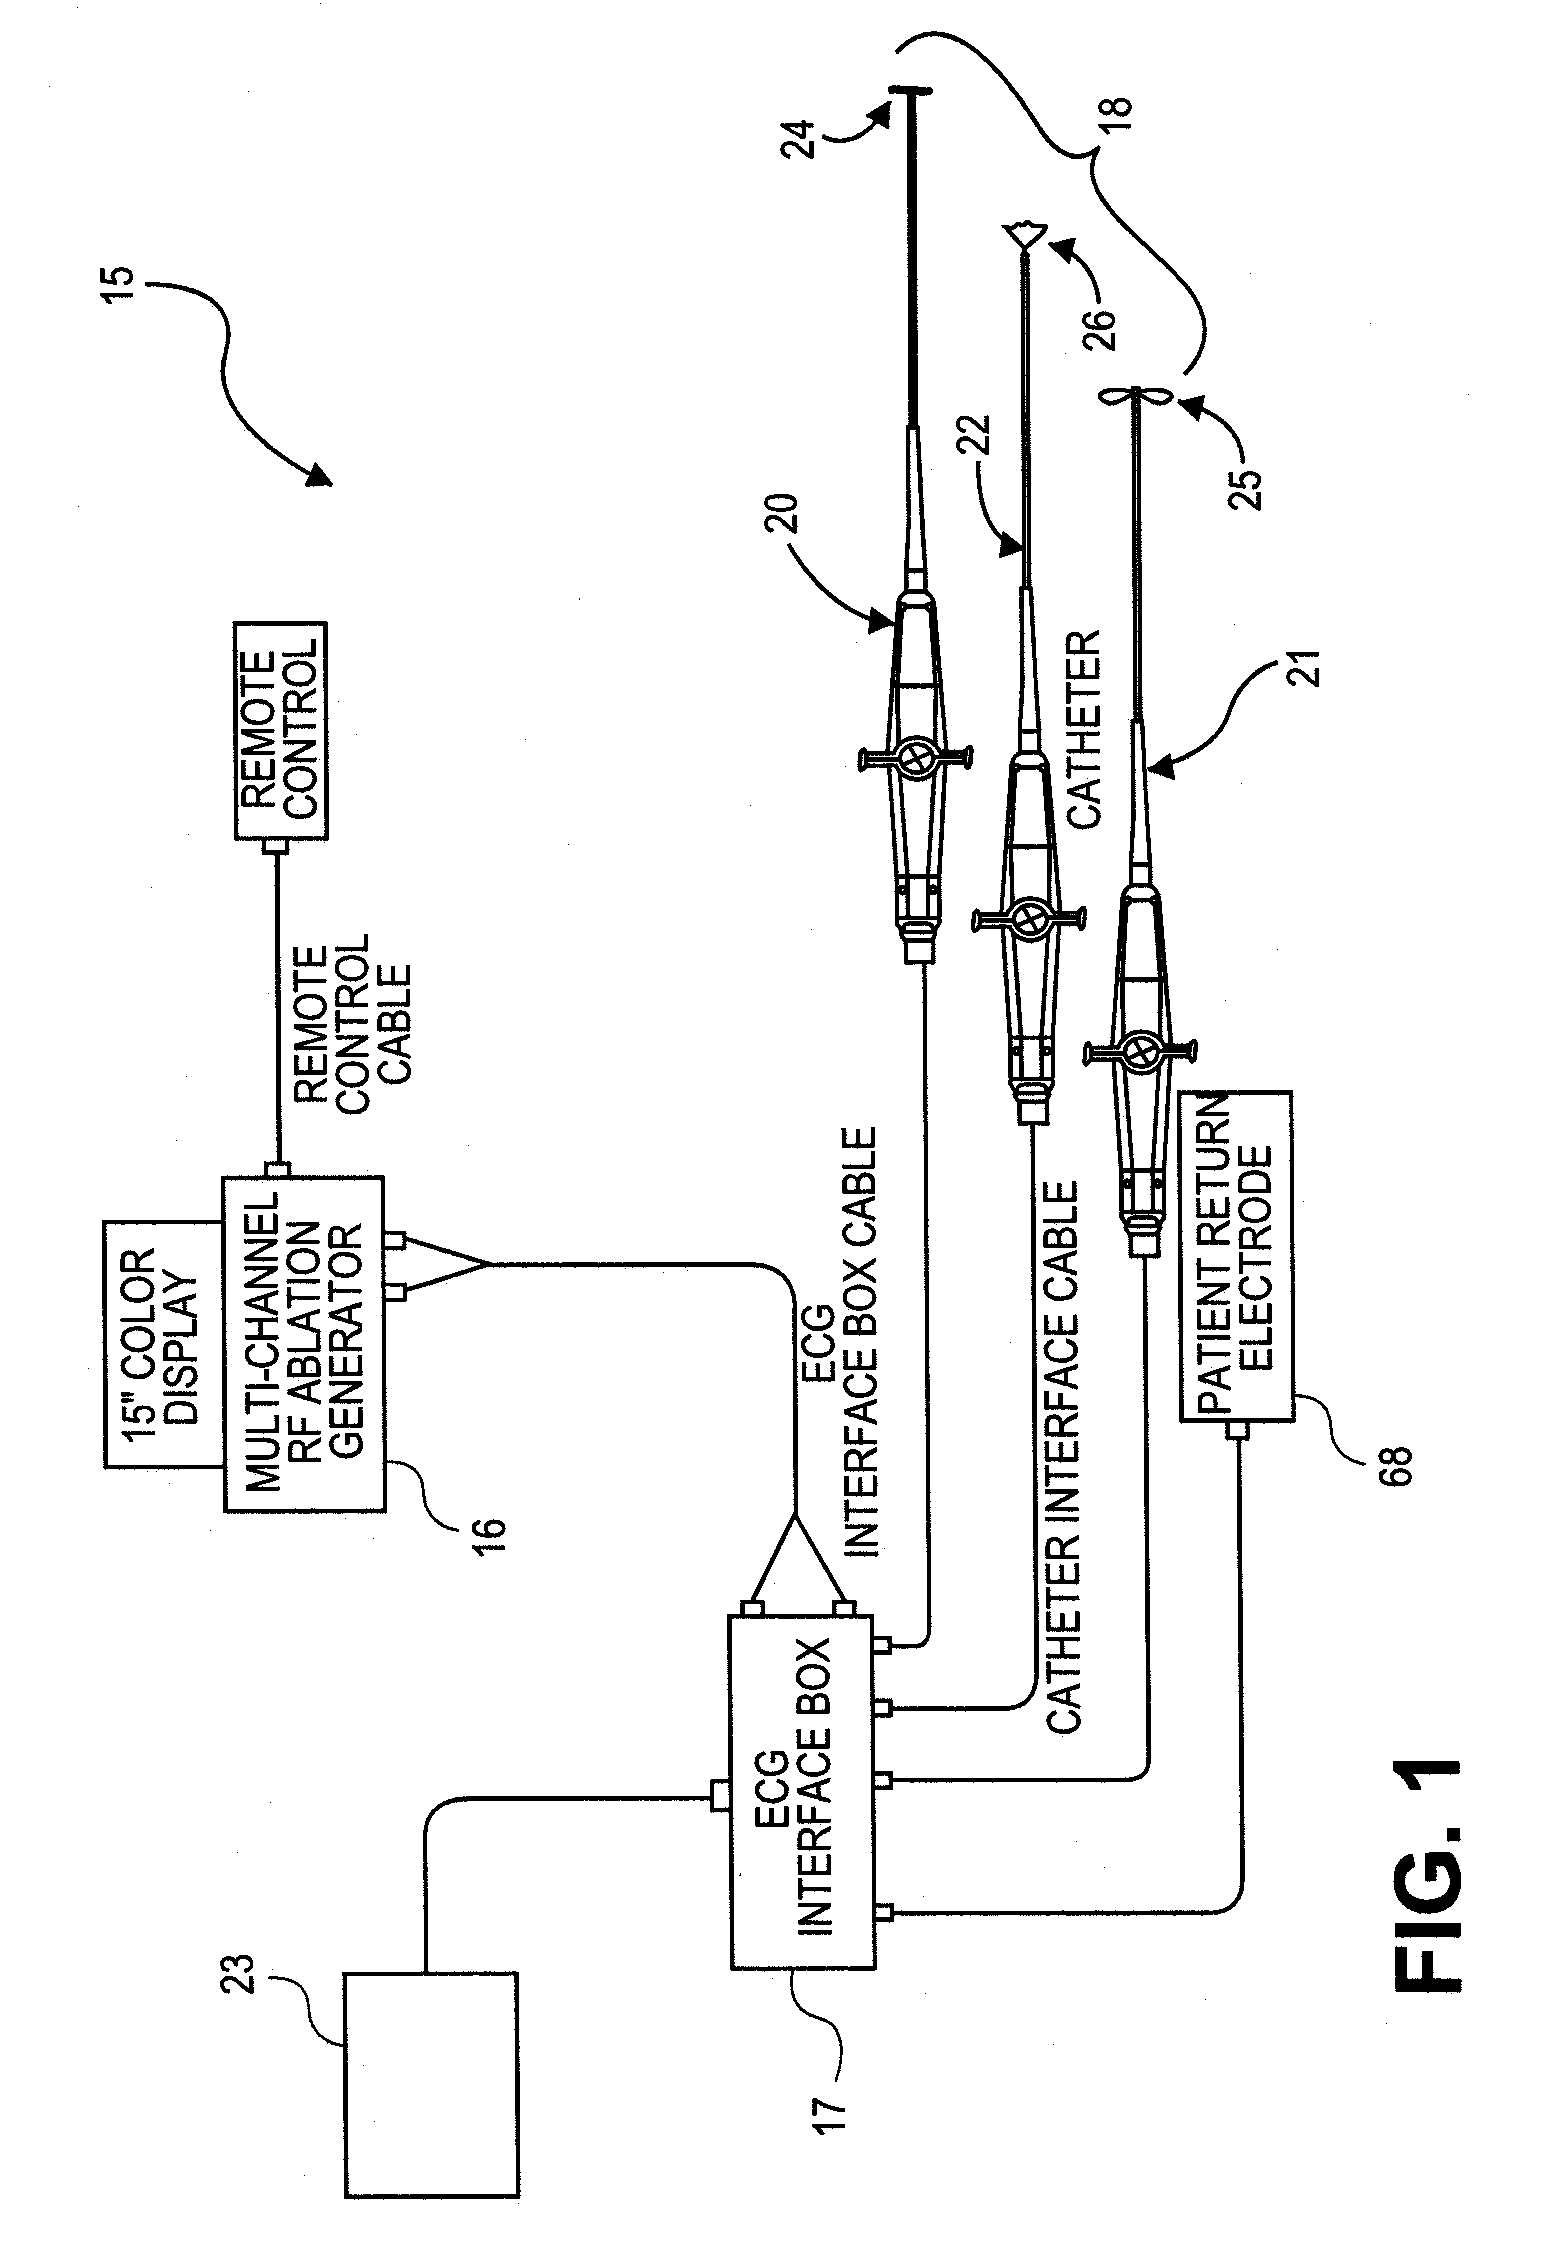 Ablation Therapy System and Method for Treating Continuous Atrial Fibrillation